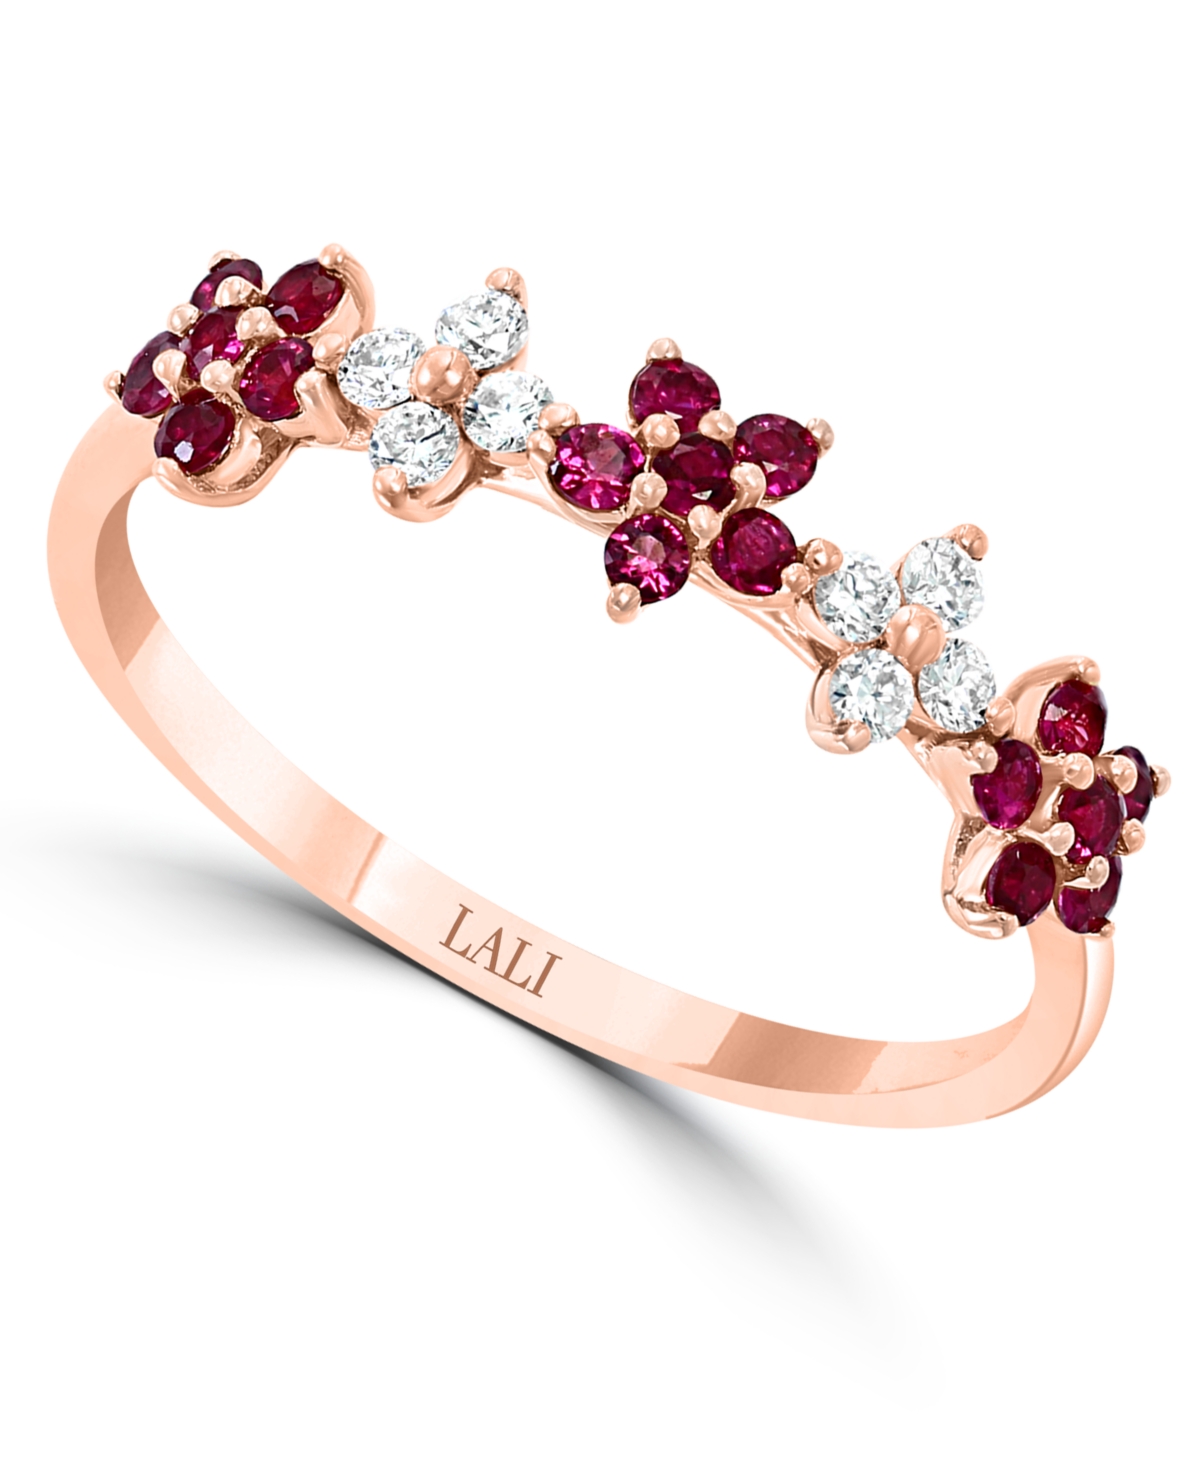 Lali Jewels Ruby (3/8 ct. t.w.) & Diamond (1/6 ct. t.w.) Flower Band in 14k Rose Gold